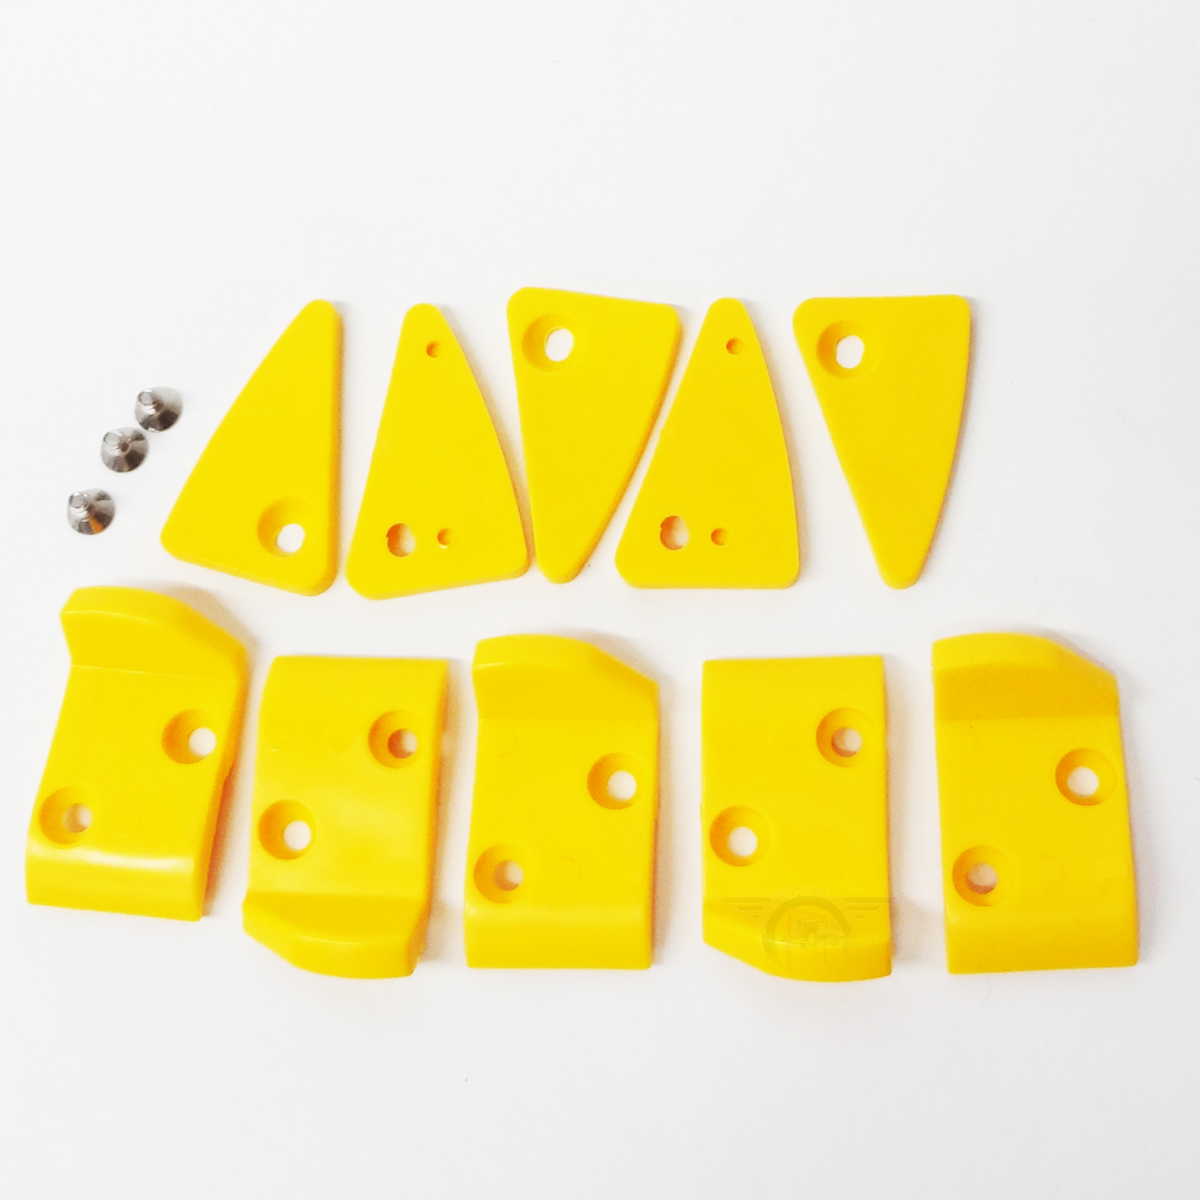 20pk Plastic Leverless Inserts with Screws for CORGHI Tire Changers and OTHERS